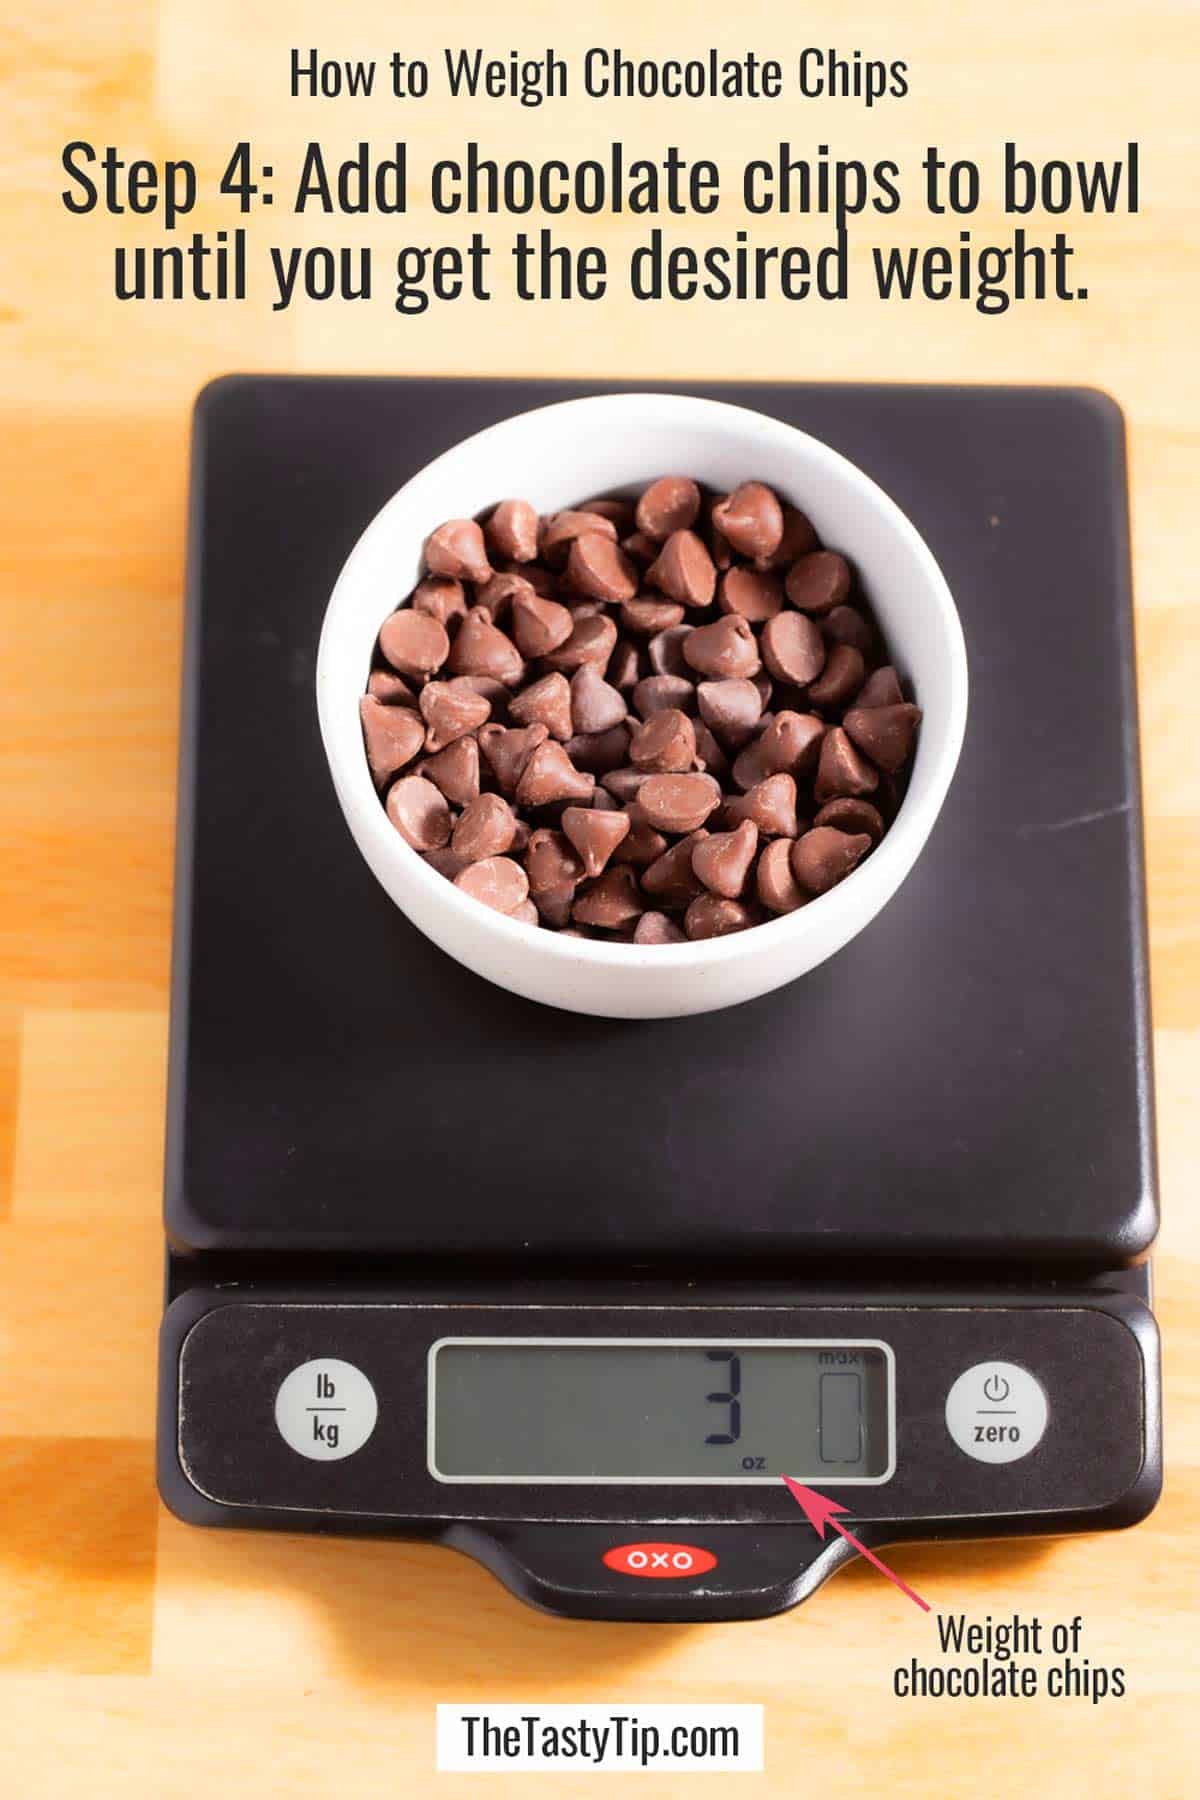 Bowl of chocolate chips on a kitchen scale.